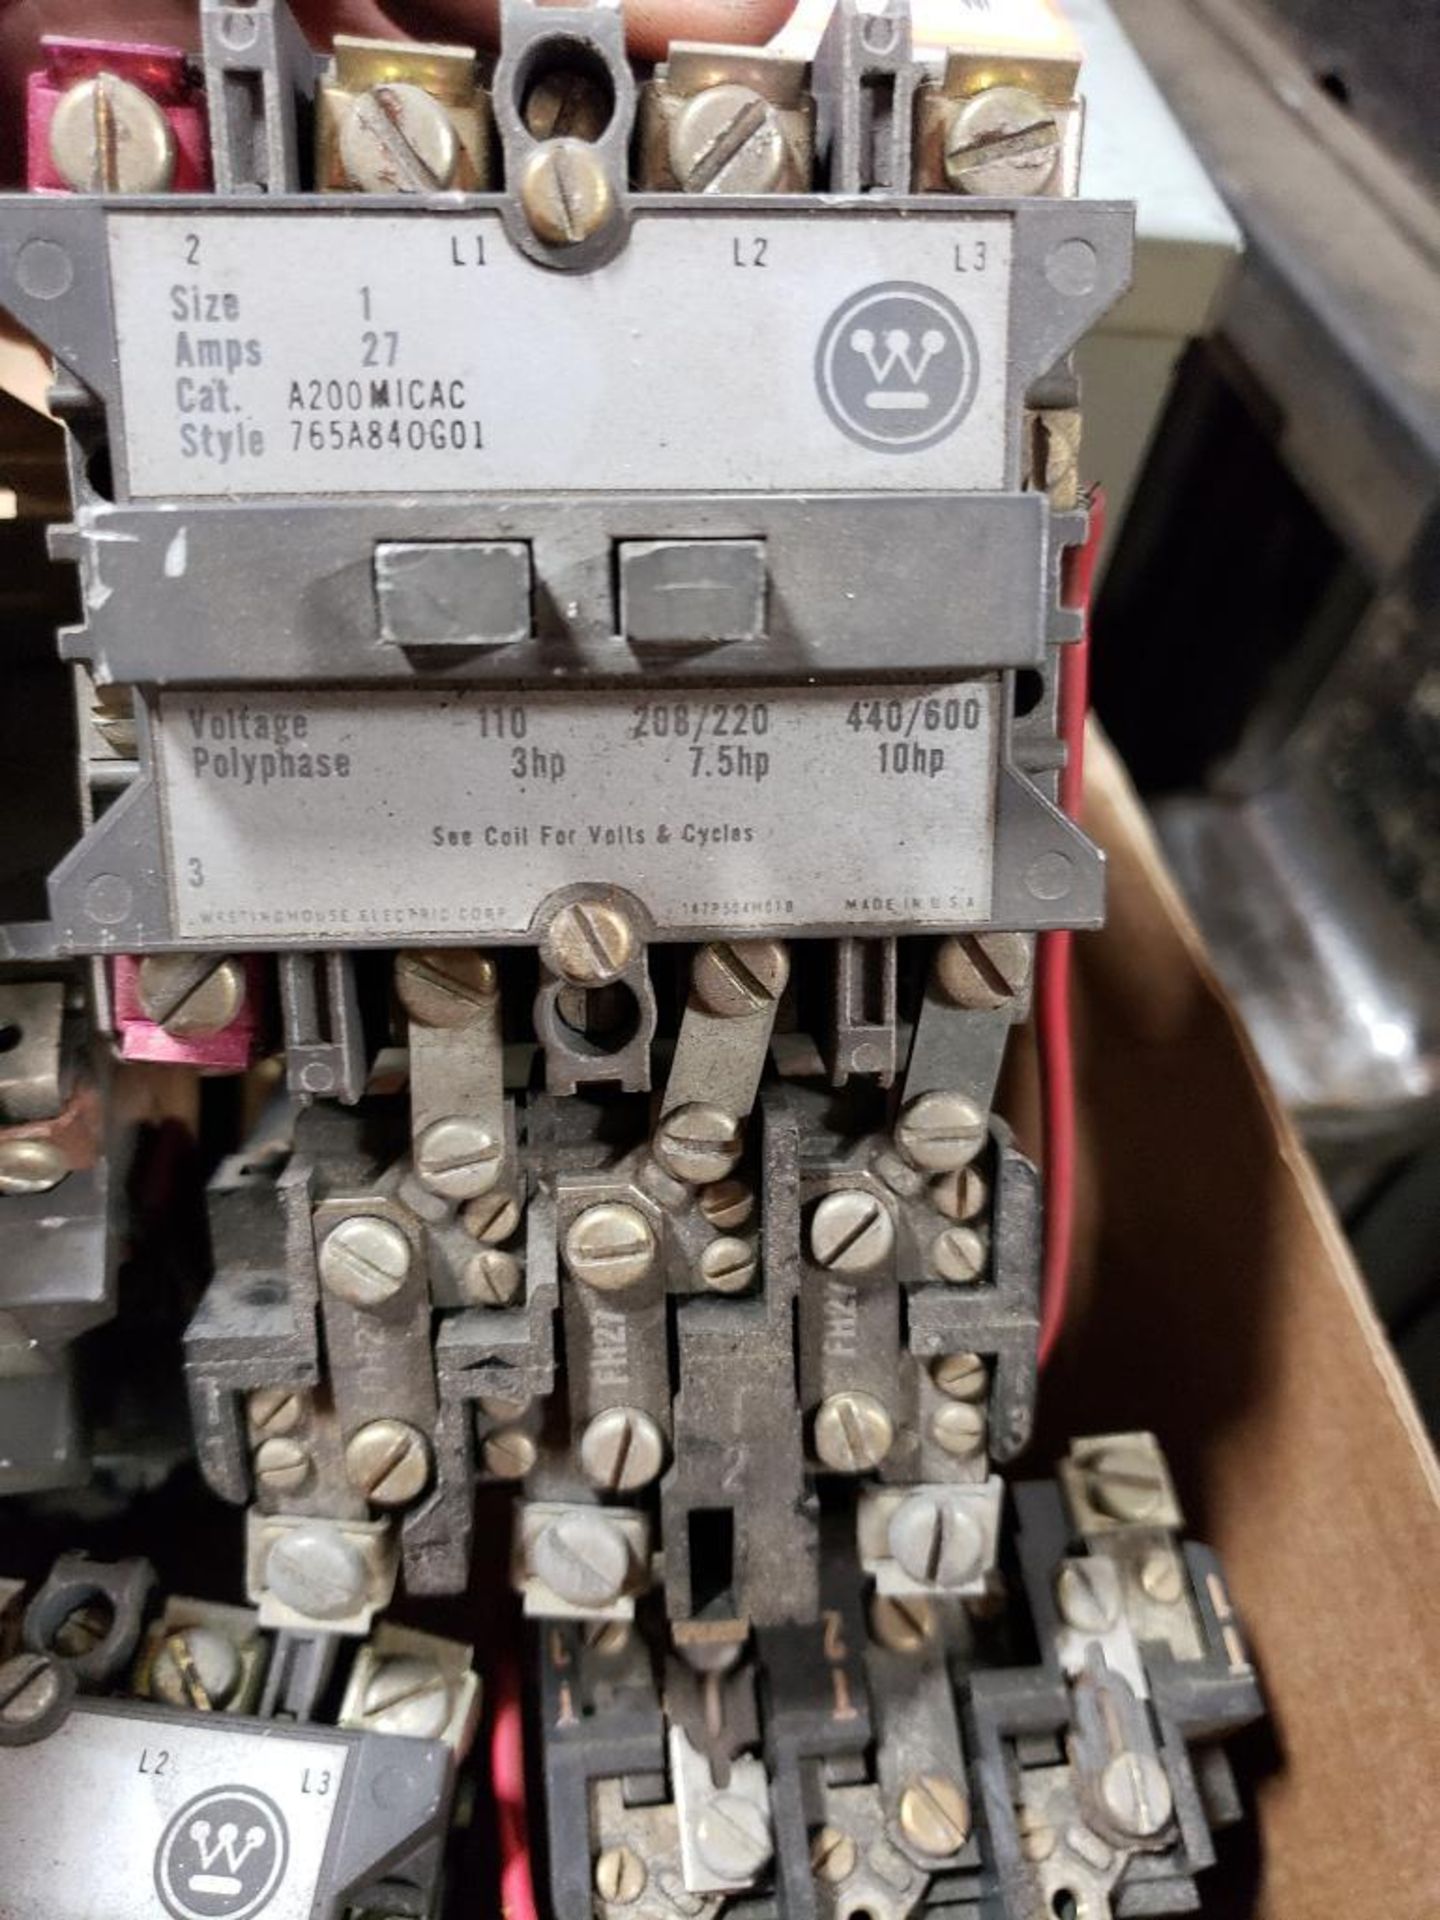 Qty 6 - Westinghouse starter contactors. A200M1CAC 27AMP. - Image 8 of 9